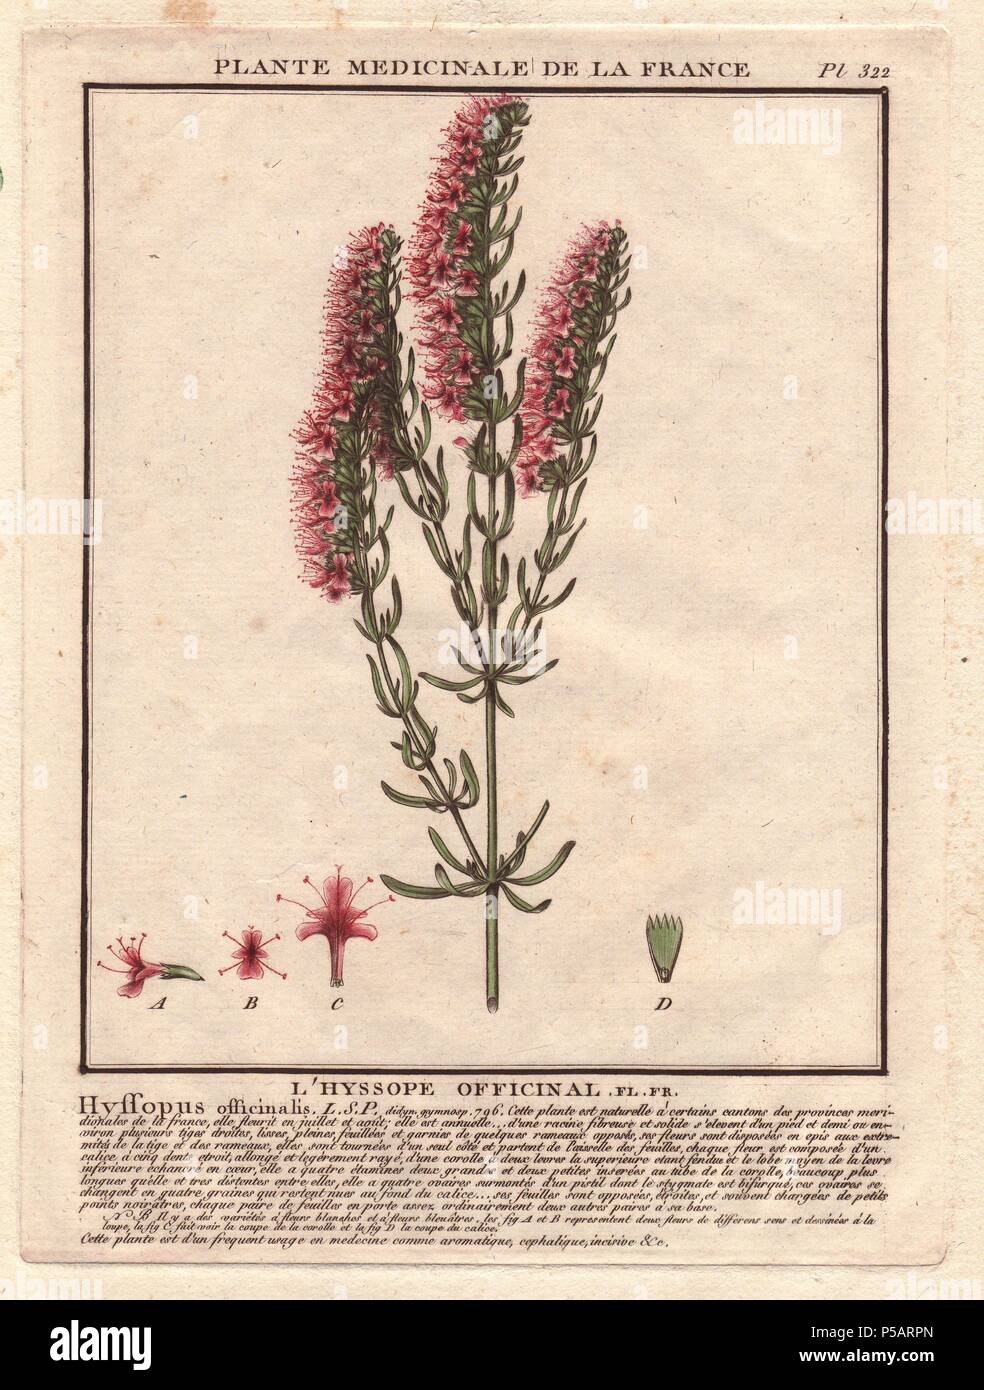 Herb Hyssop (Hyssopus officinalis) is an antiseptic, cough reliever, and expectorant, and commonly used as an aromatic herb and medicinal plant.. . French botanist Jean Baptiste François Pierre Bulliard was born around 1742 at Aubepierre-en-Barrois (Haute Marne) and died on 26 September 1793 in Paris. He studied at Angers, and later illustrated and published a number of botanical and mycological works on French flora. He studied art and engraving under Francois Martinet, the celebrated artist of many of Buffon's natural history books. Stock Photo